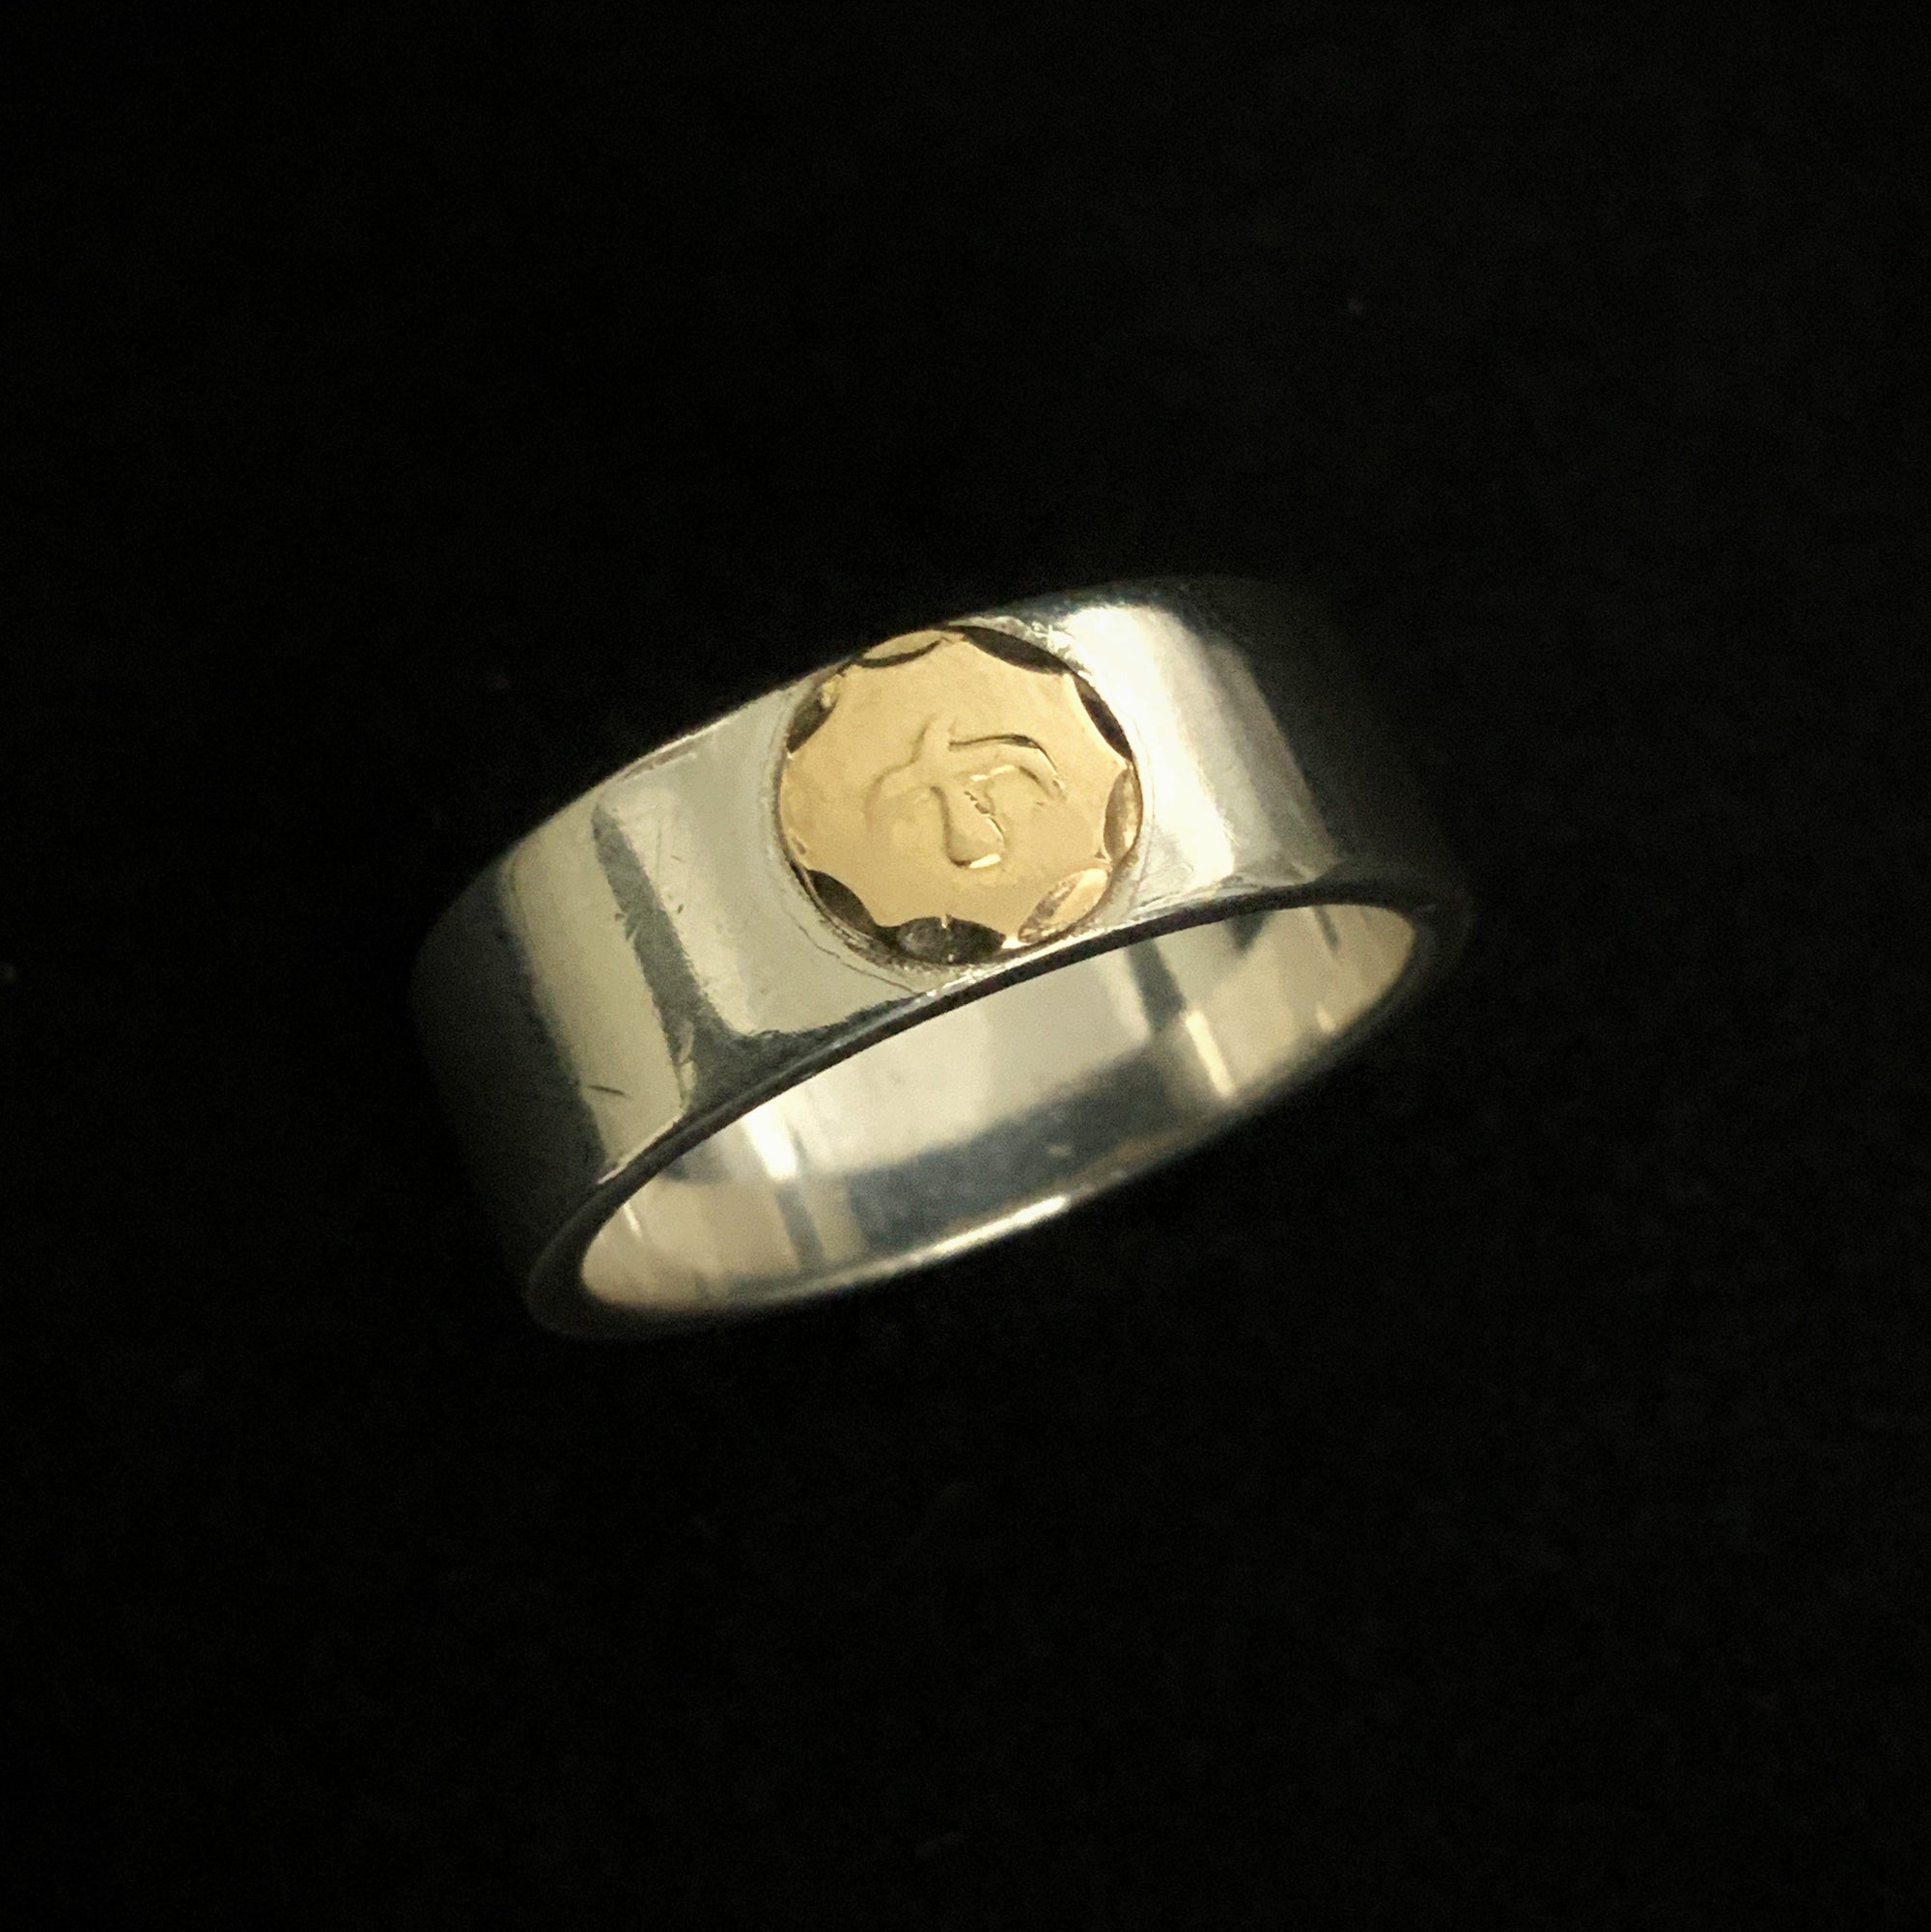 Flattened Ring - Silver and Gold | Goros FeatherAuthorized Dealer